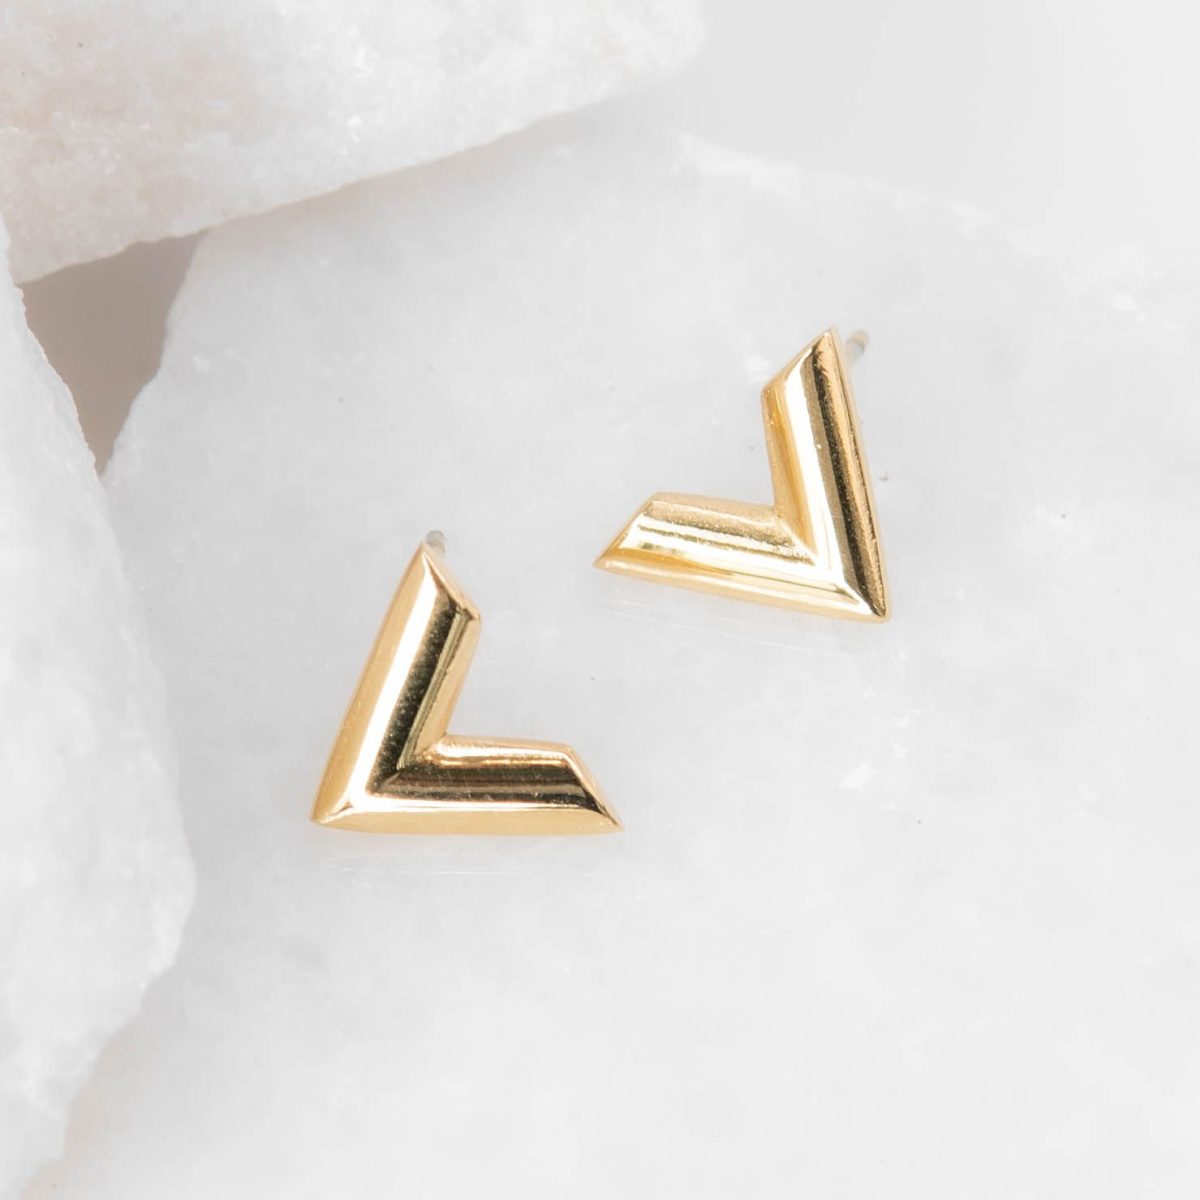 https://m.clubbella.co/product/vermont-gold-earrings/ Vermont earrings Gold (4)